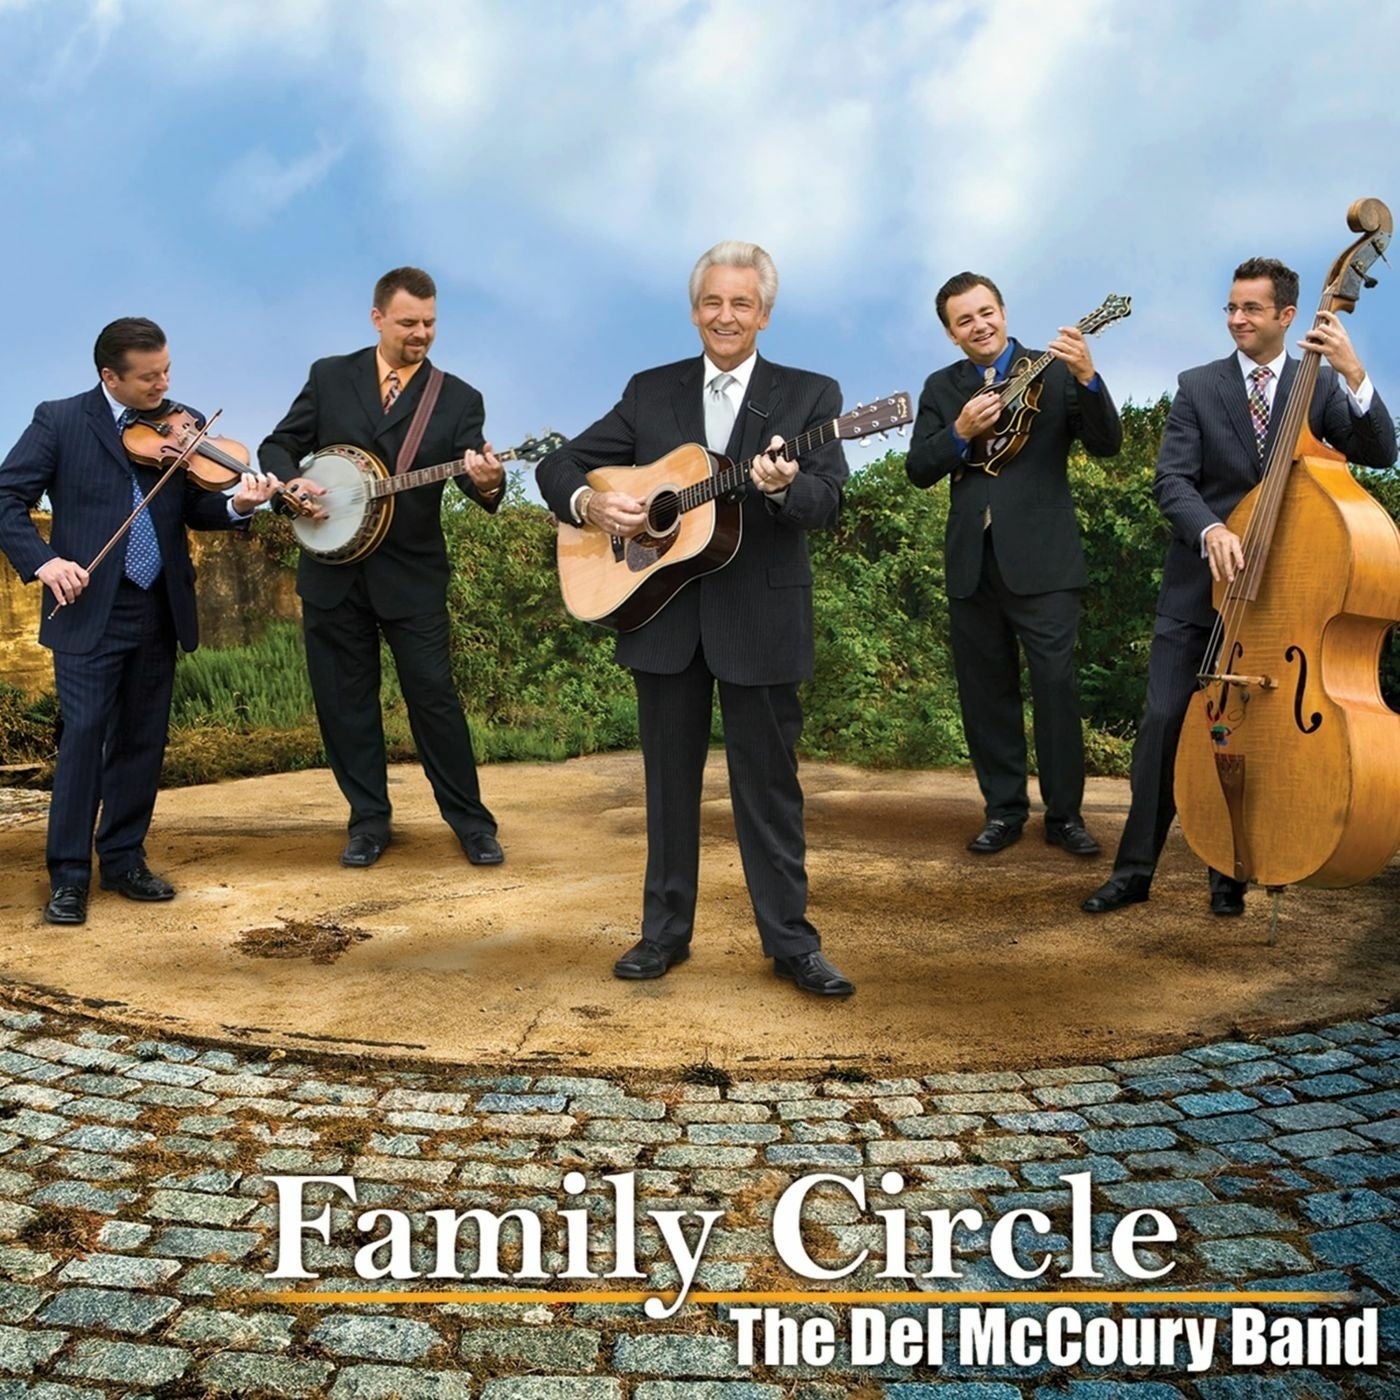 The Streets of Baltimore by Del McCoury Band on Beatsource